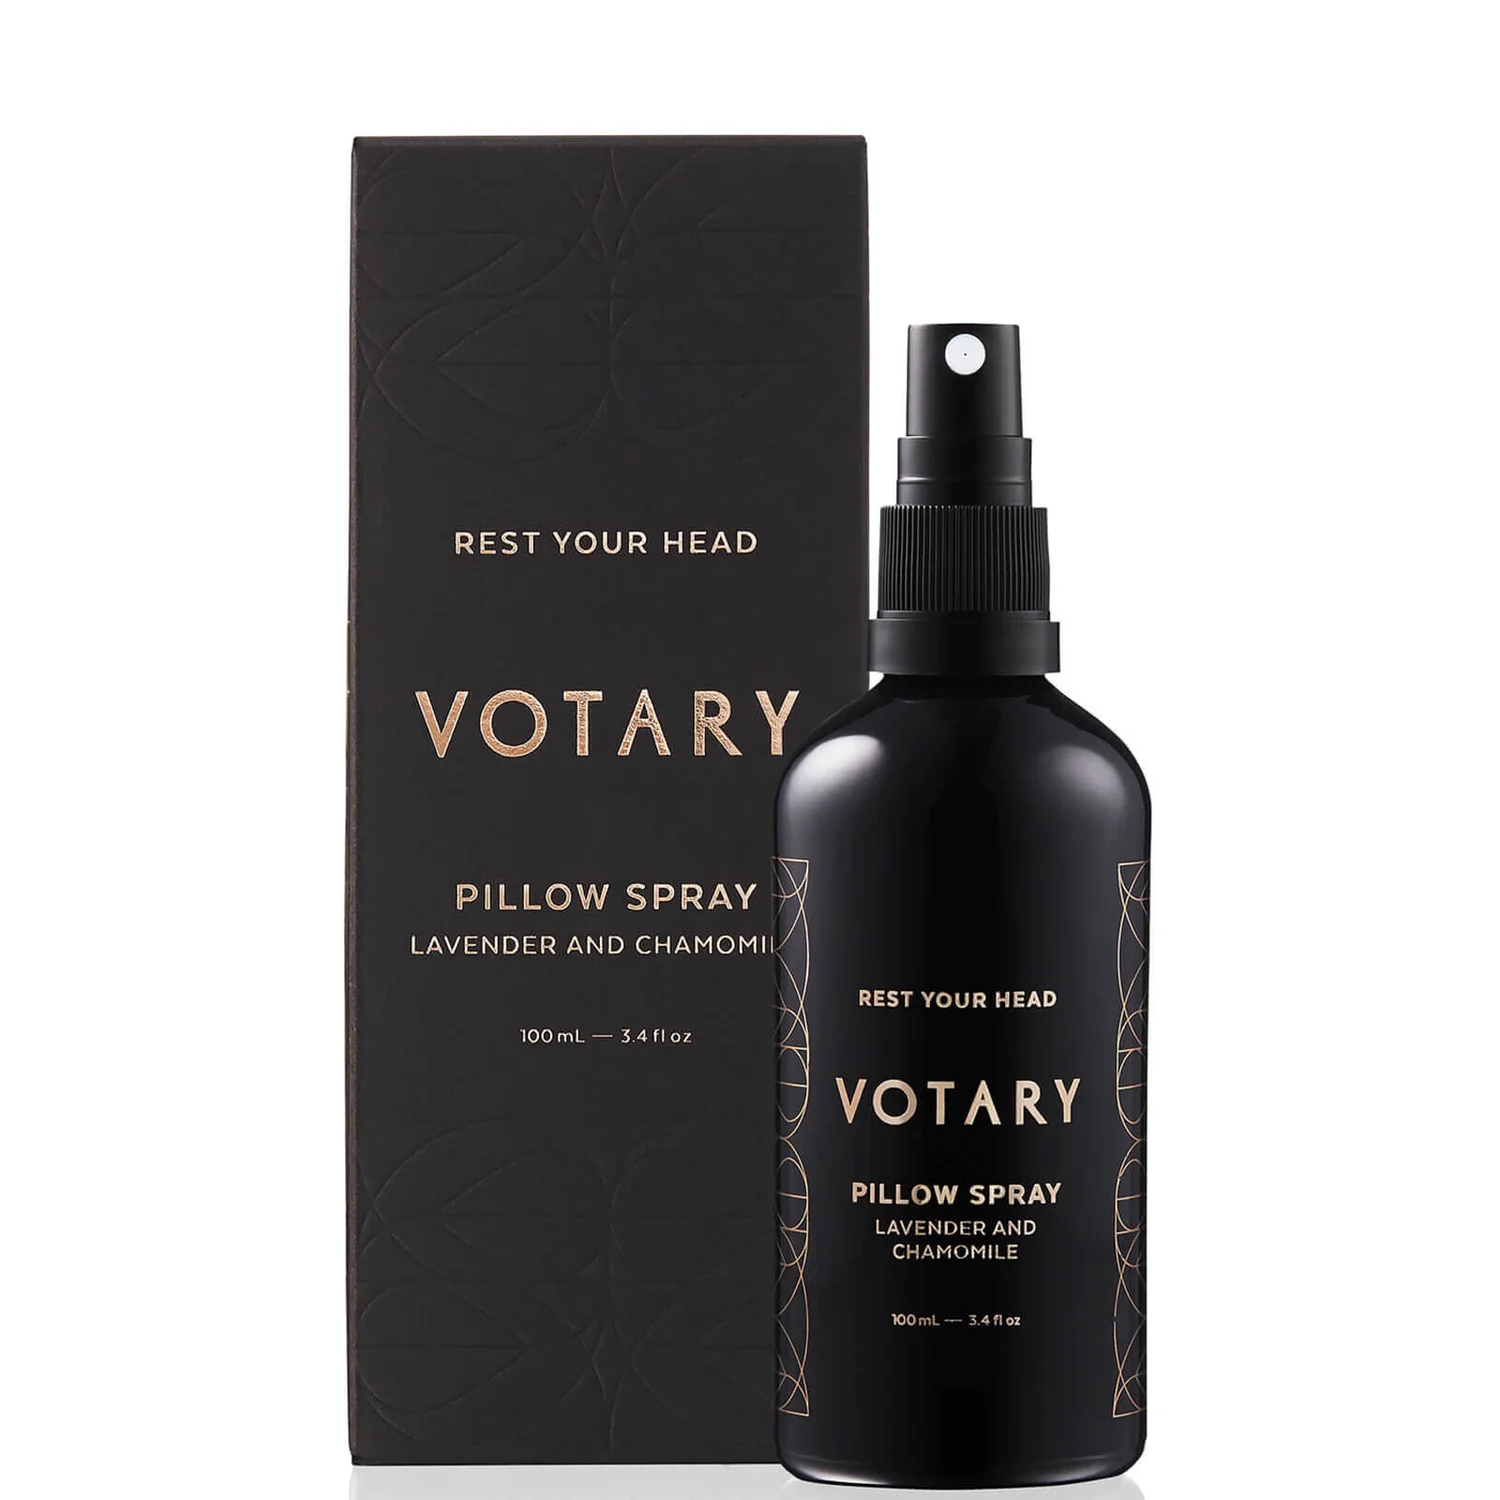 cultbeauty.co.uk | Votary Pillow Spray Lavender and Chamomile